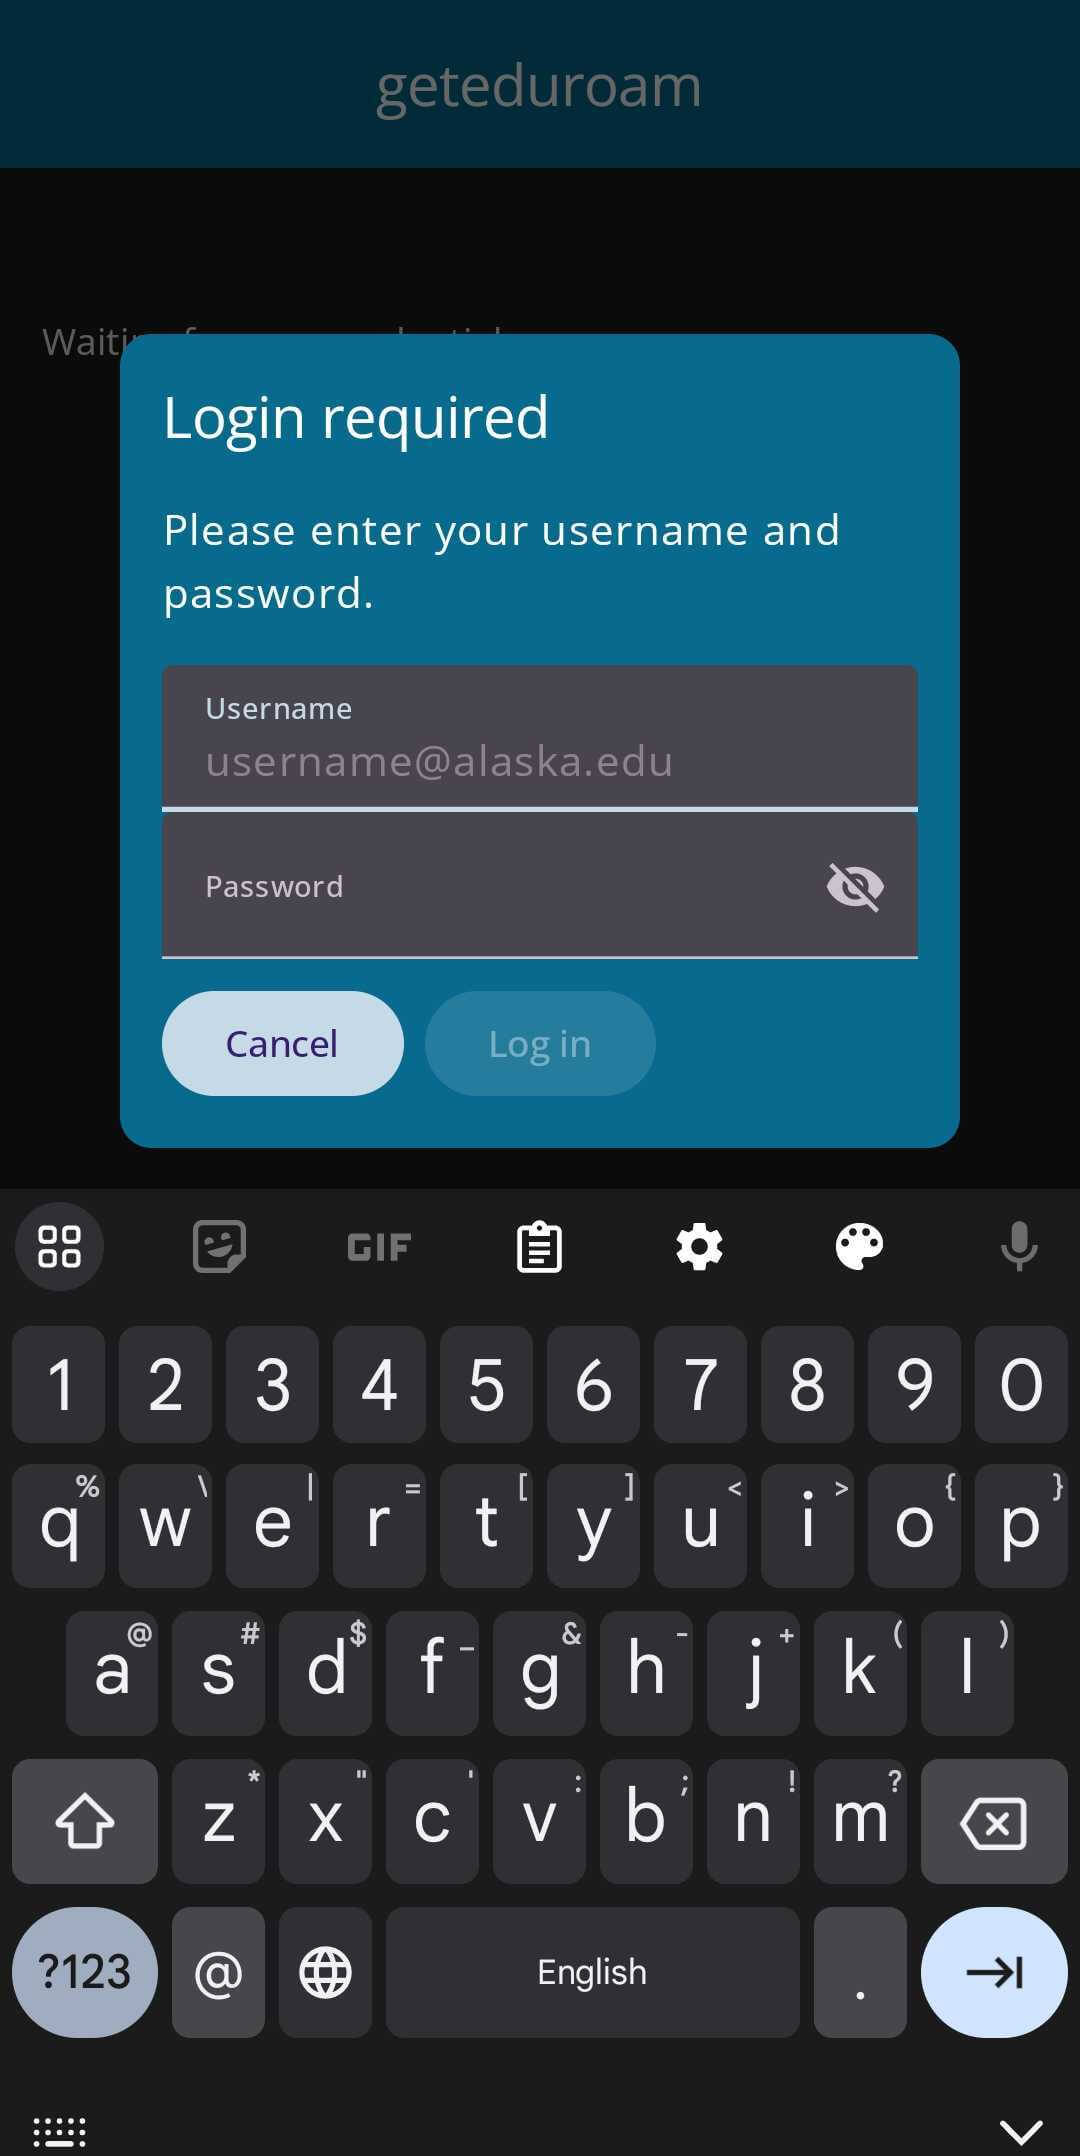 A login prompt within the geteduroam app. It says 'Login required. Please enter your username and password.' and has a field for a username and password below. A keyboard is visible at the bottom of the screen.